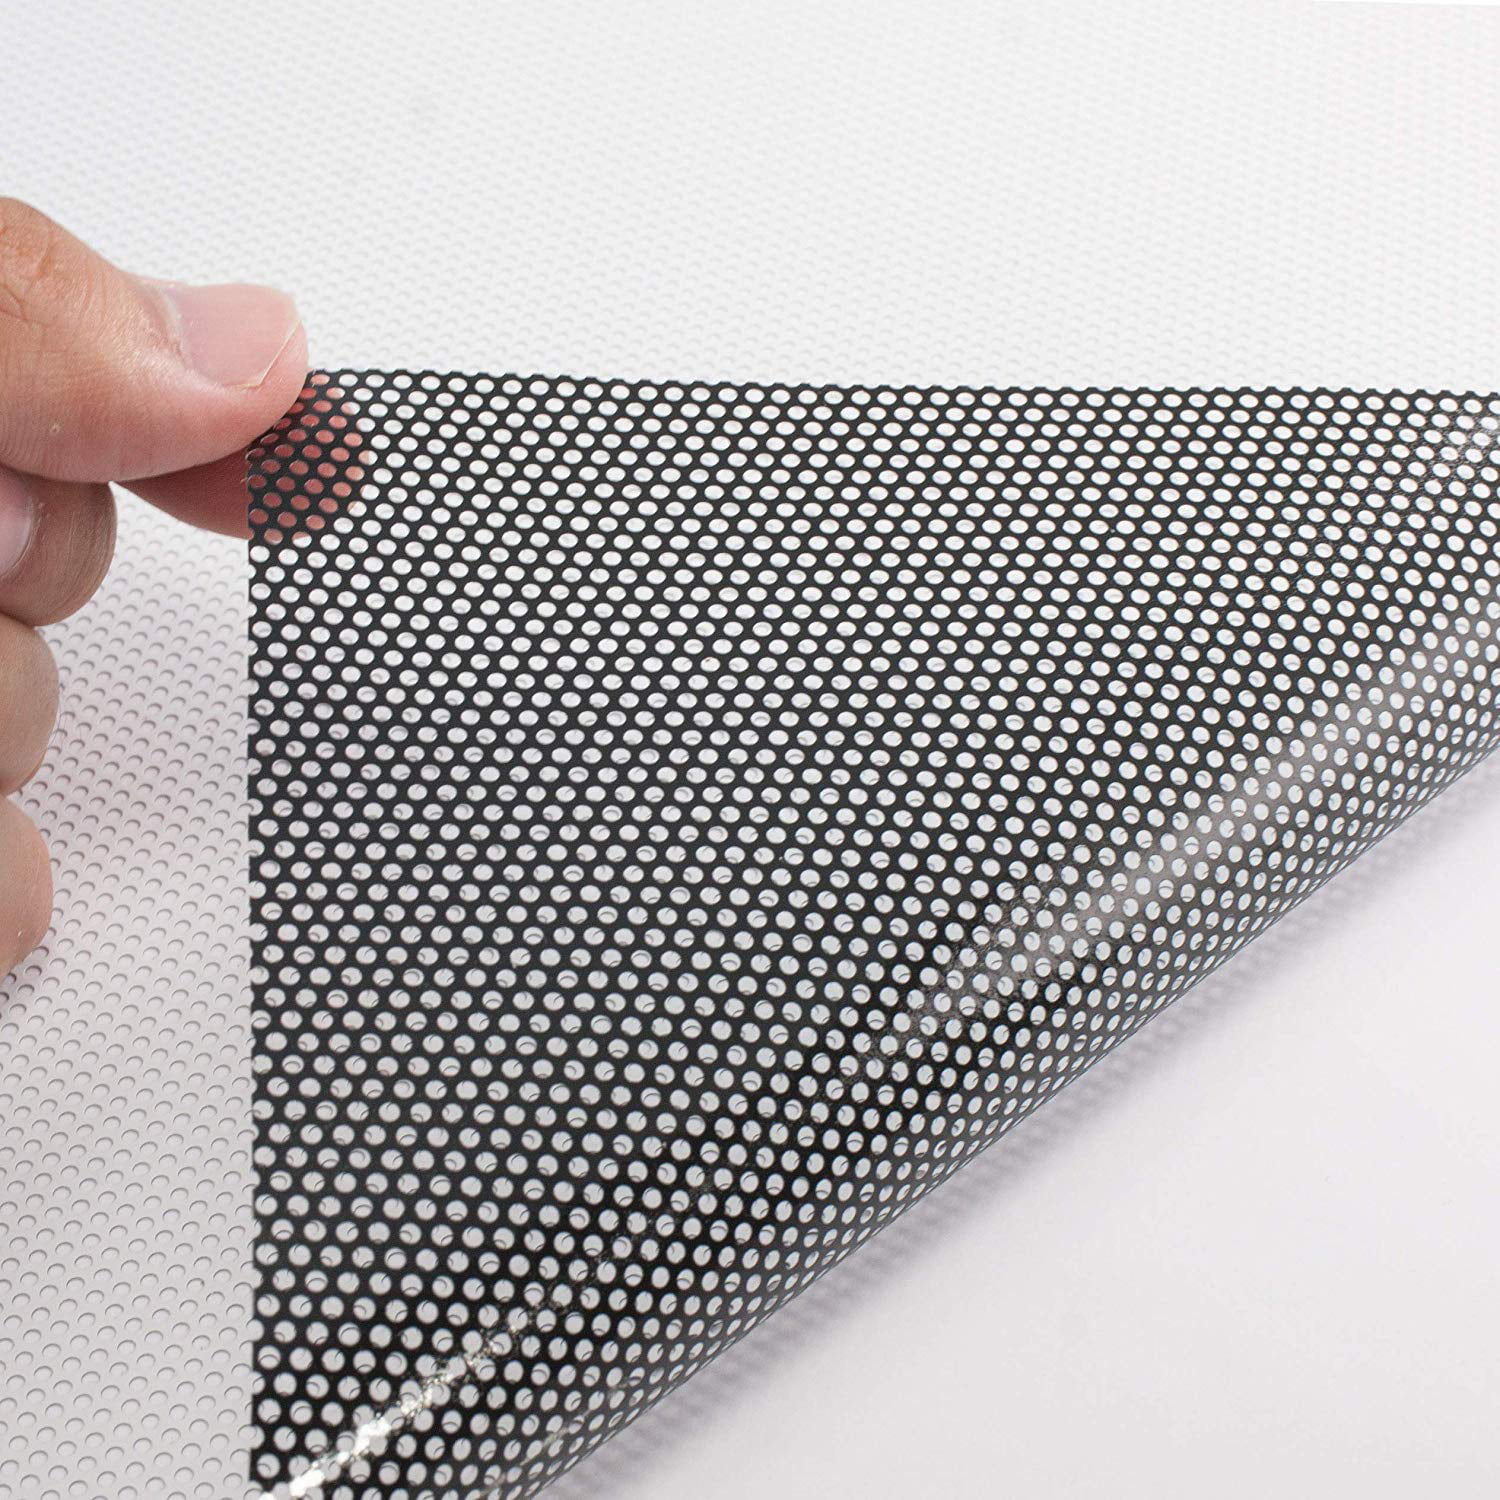 Two Way Vision 54 x165' 54inch x165ft Perforated Self-Adhesive Vinyl Window Film Two Way Vision Printing Material Roll Adhesive Glass Wrap Roll 